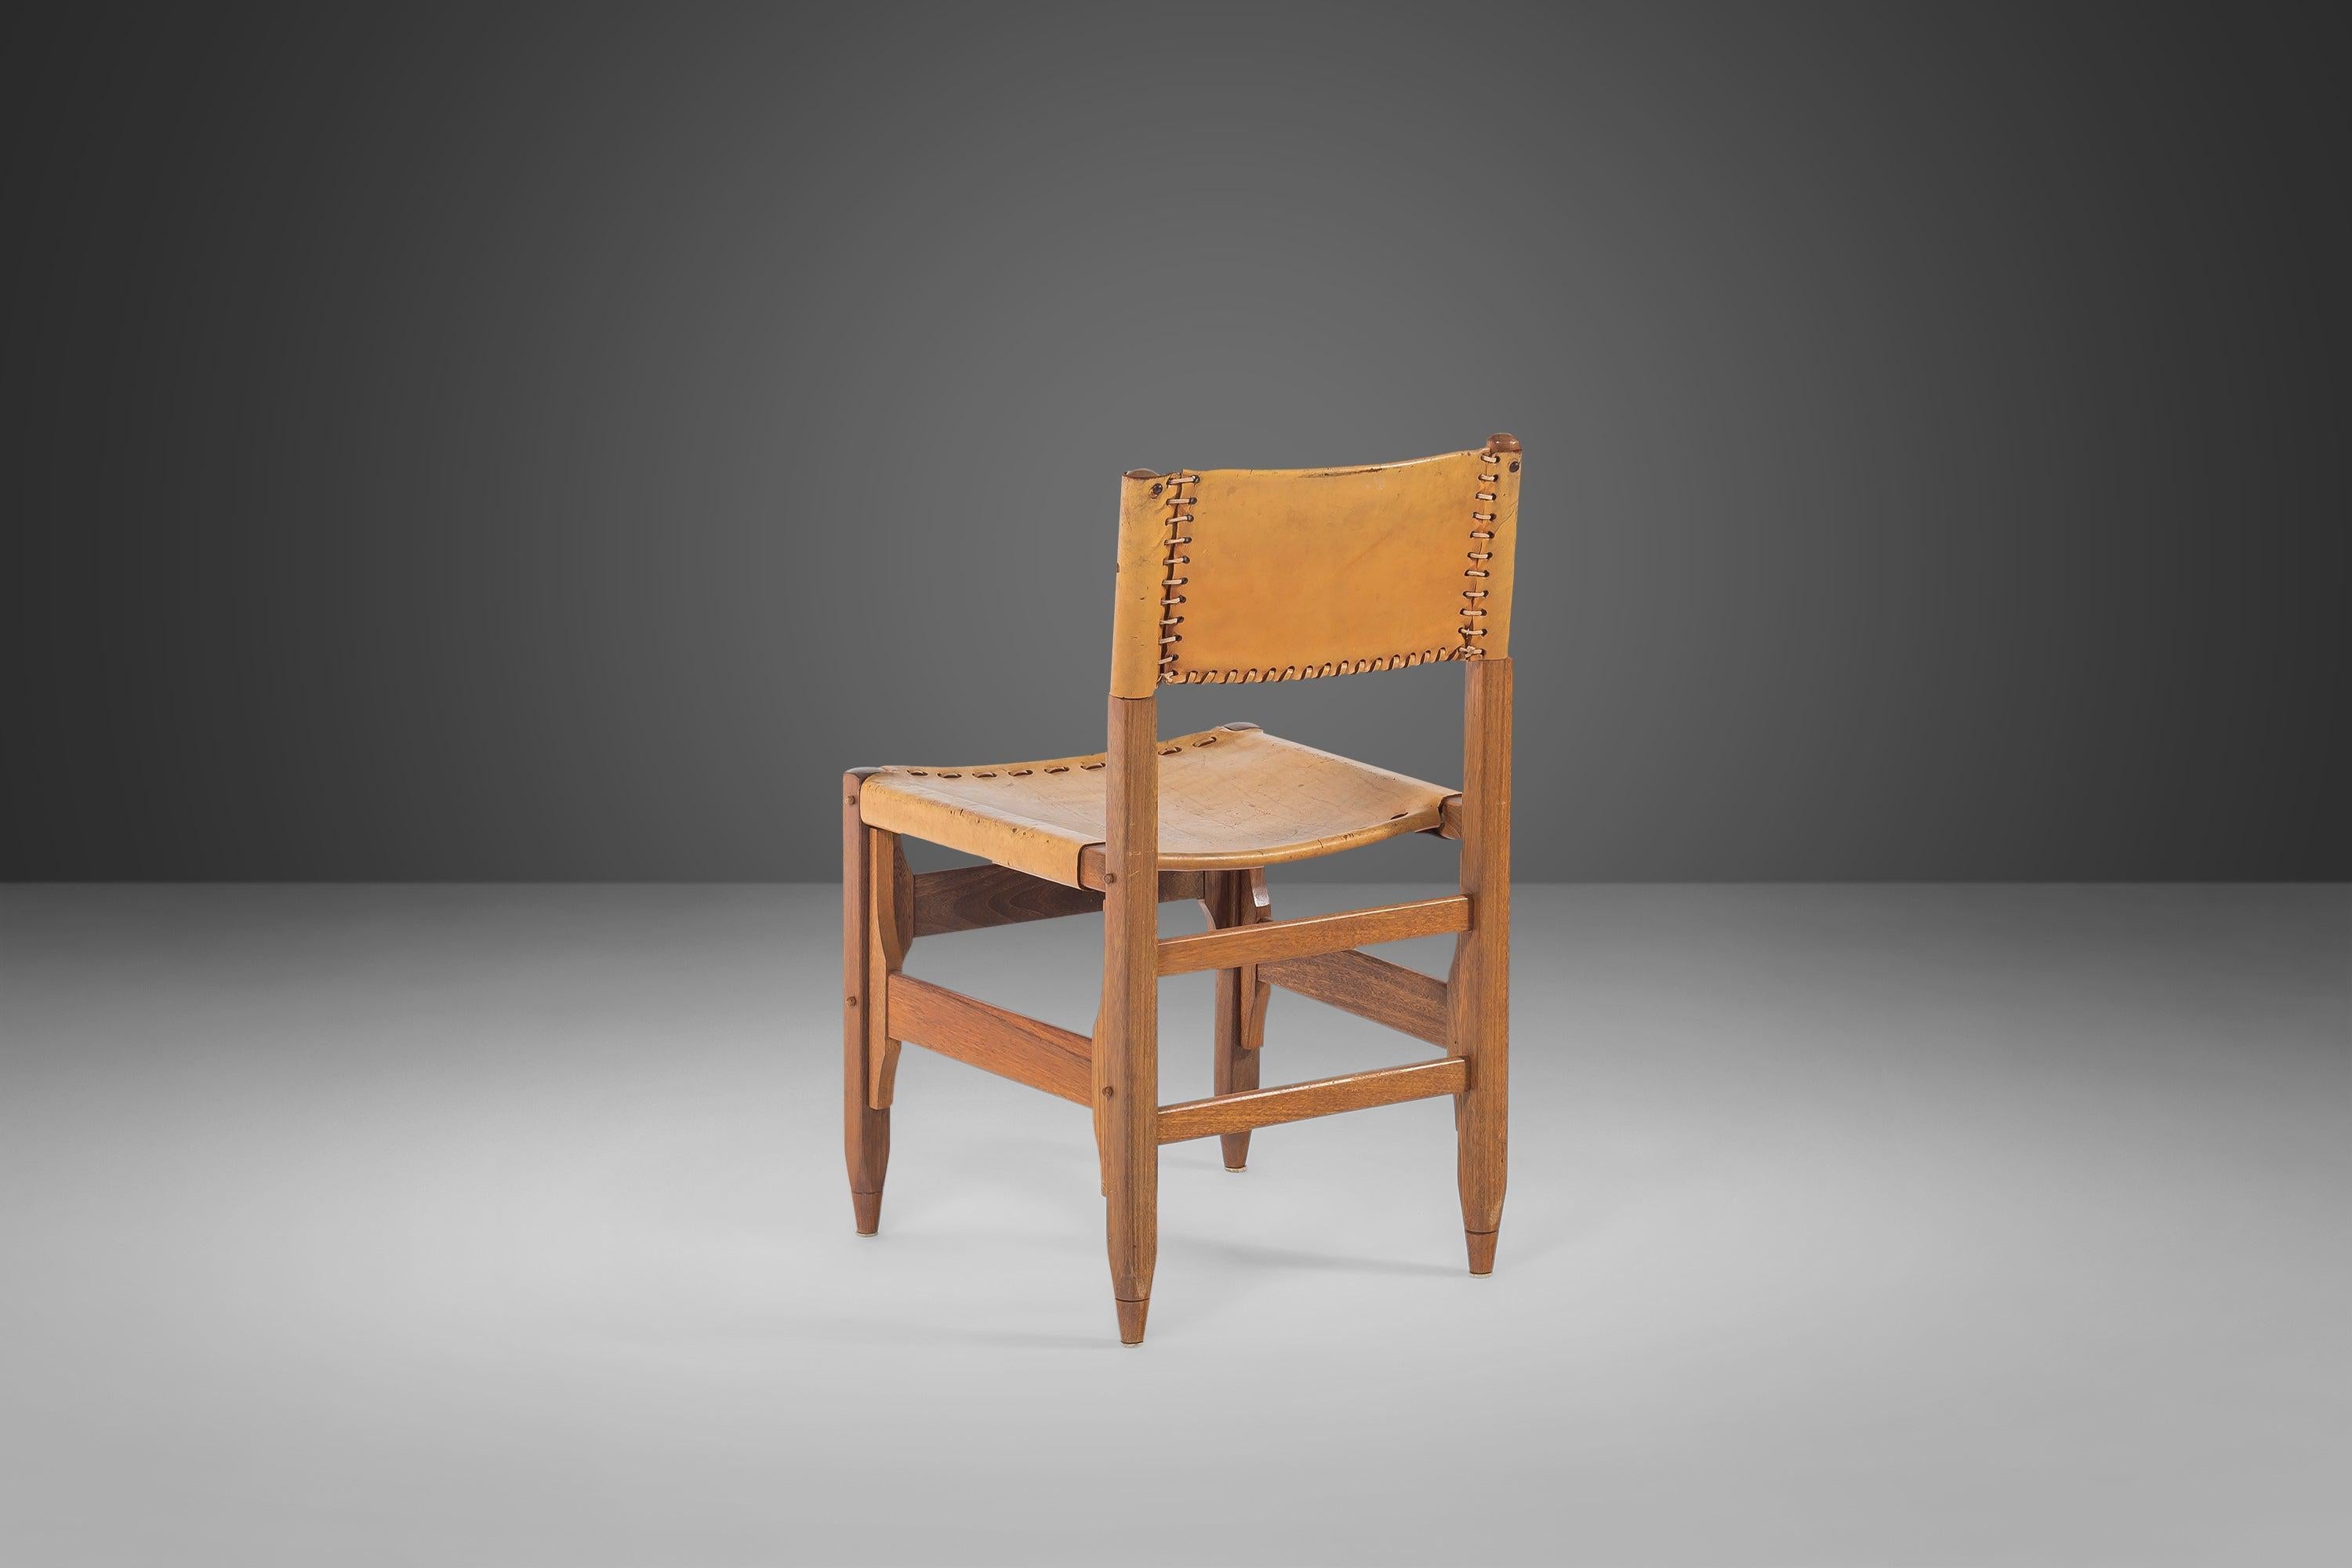 Walnut Tanned Saddle Leather Side Chair Designed by Biermann Werner for Arte Sano, 1960 For Sale